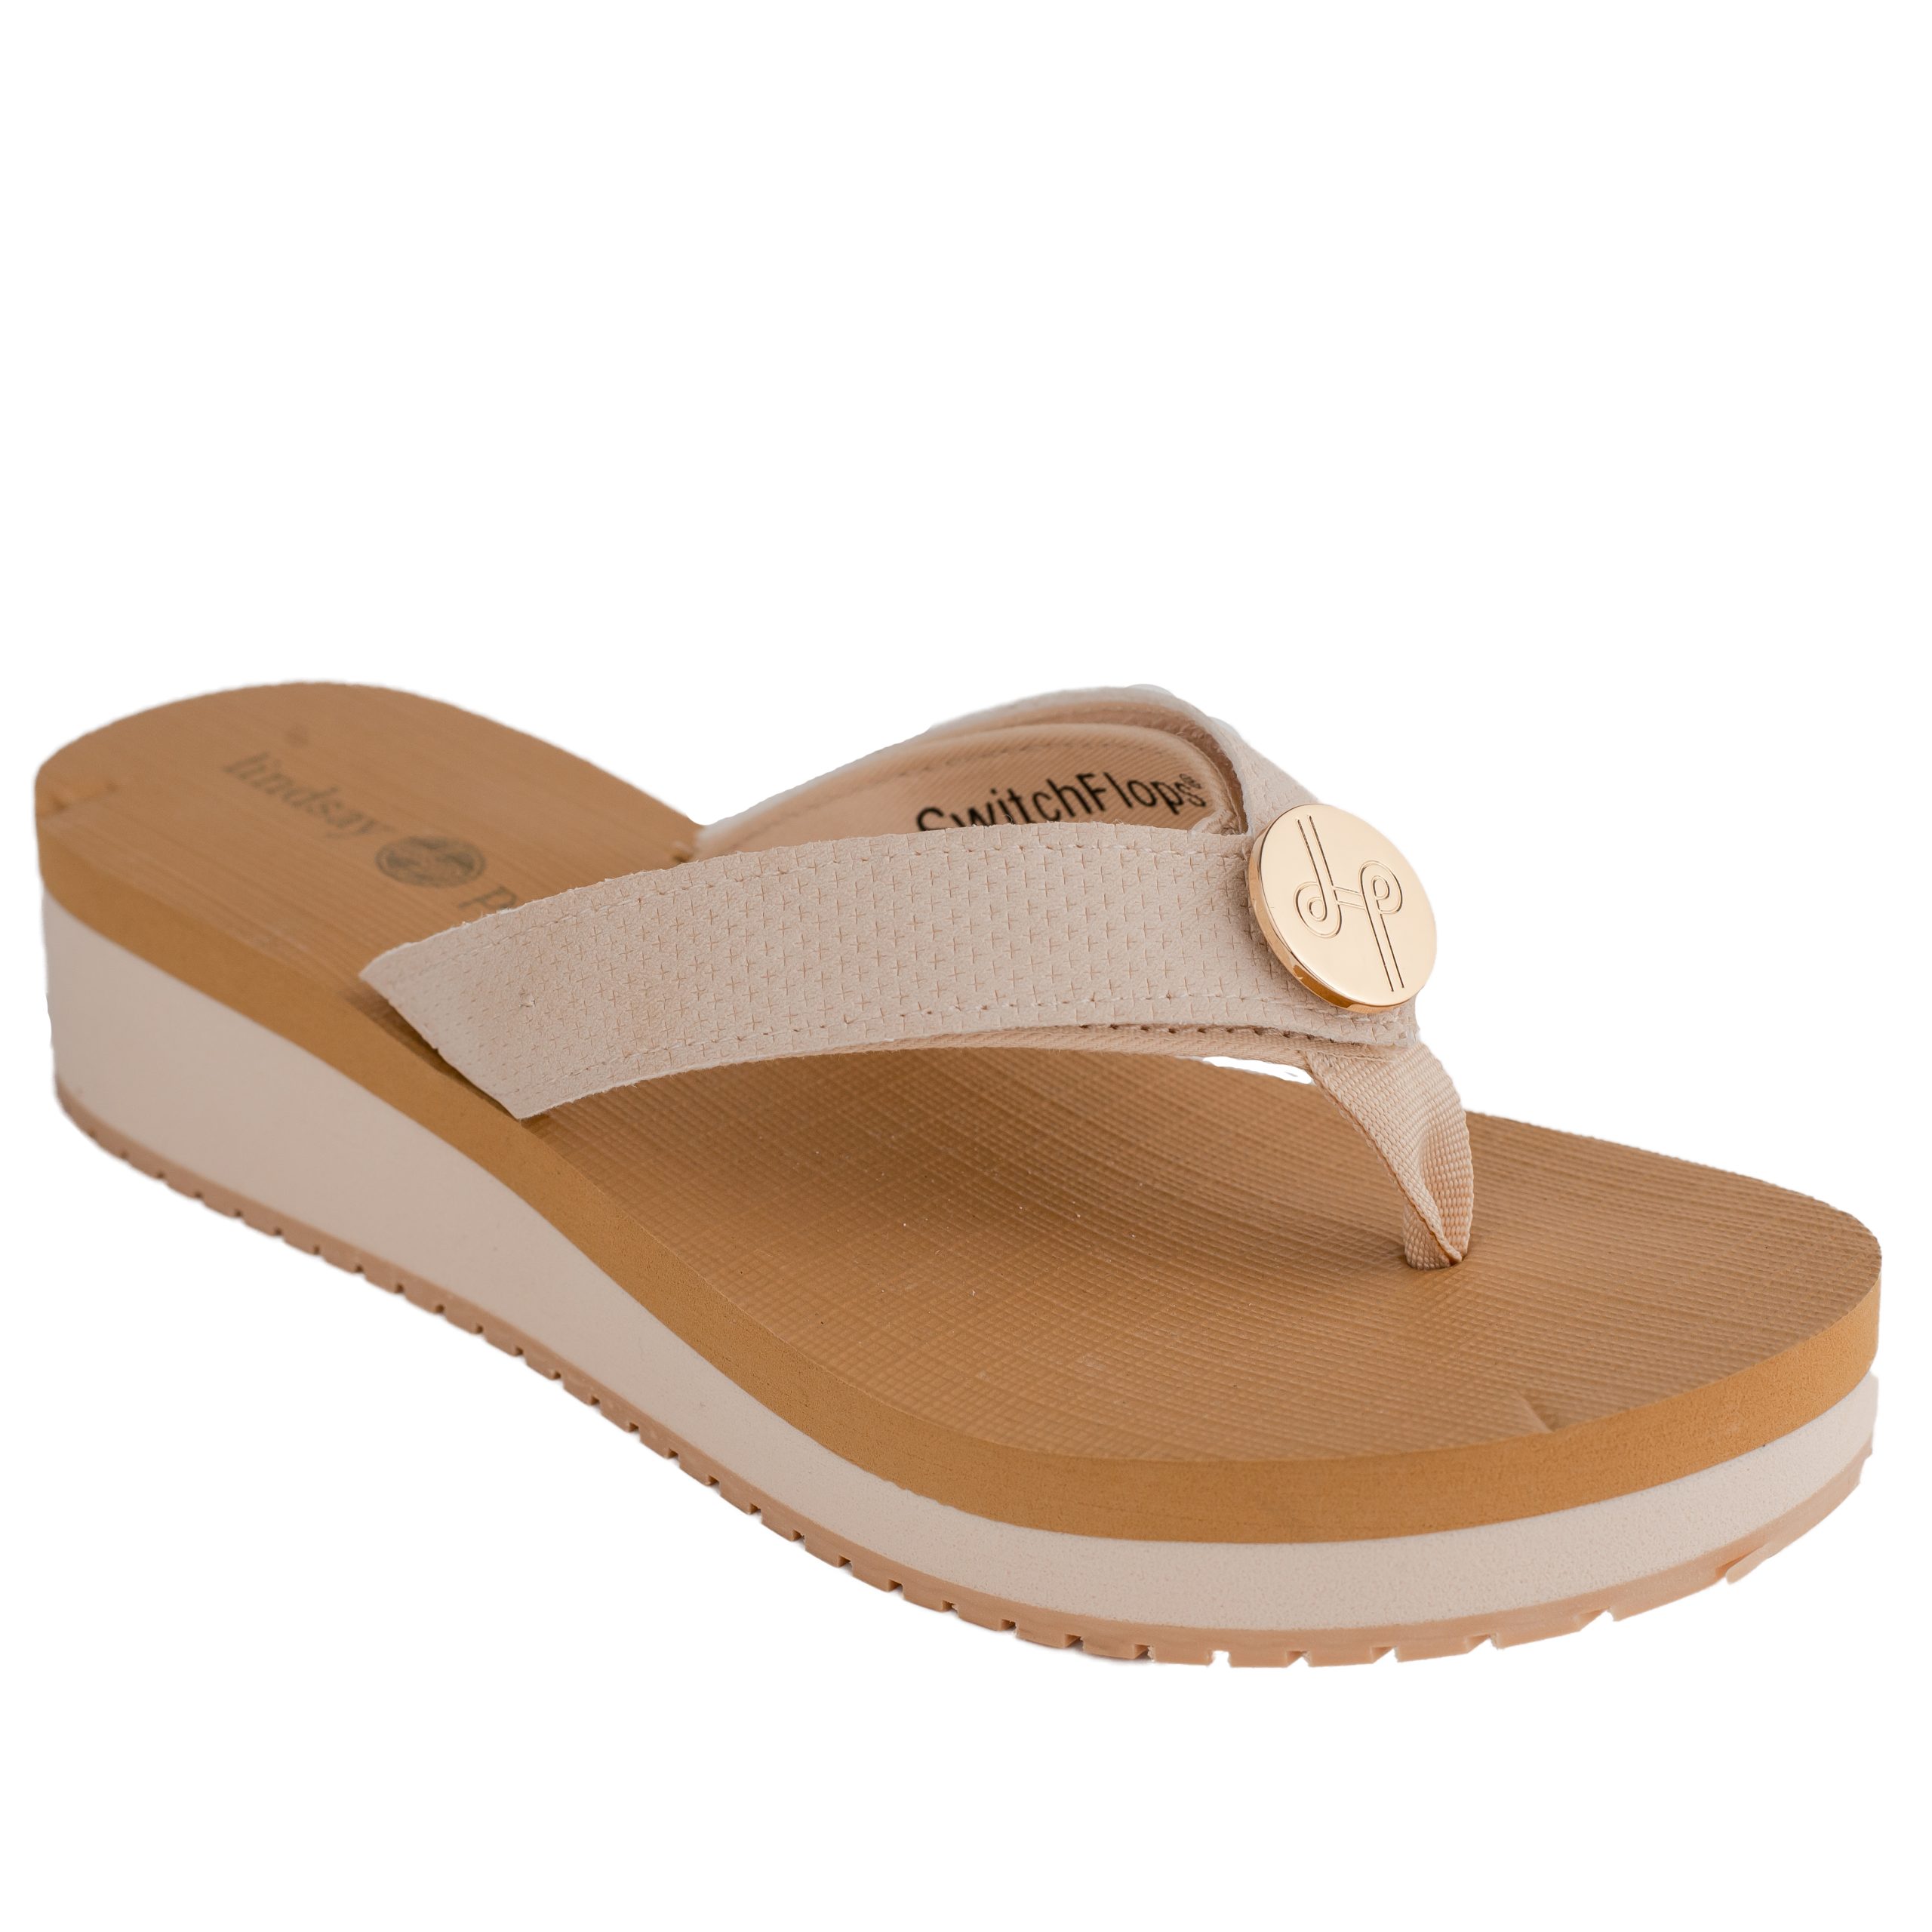 Size 8 Cream Cathy Snap Flip Flops - Wilford & Lee Home Accents